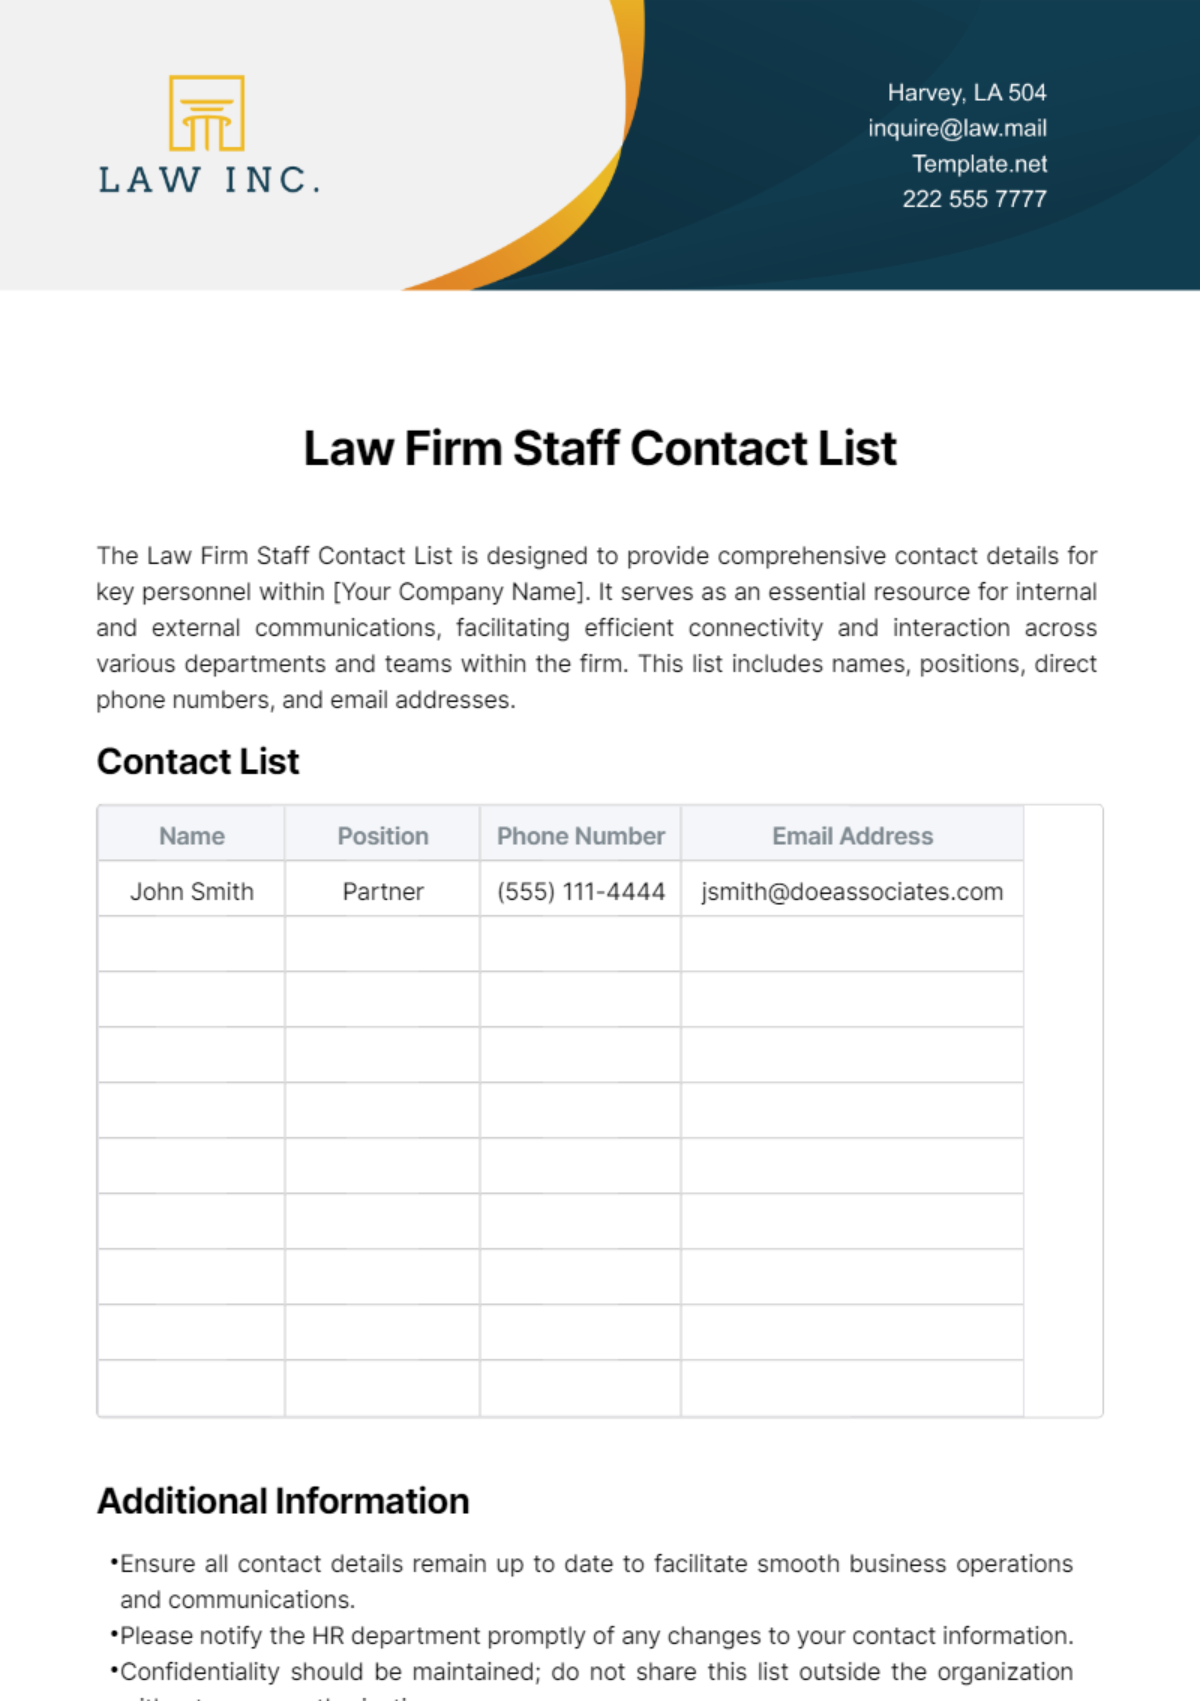 Free Law Firm Staff Contact List Template